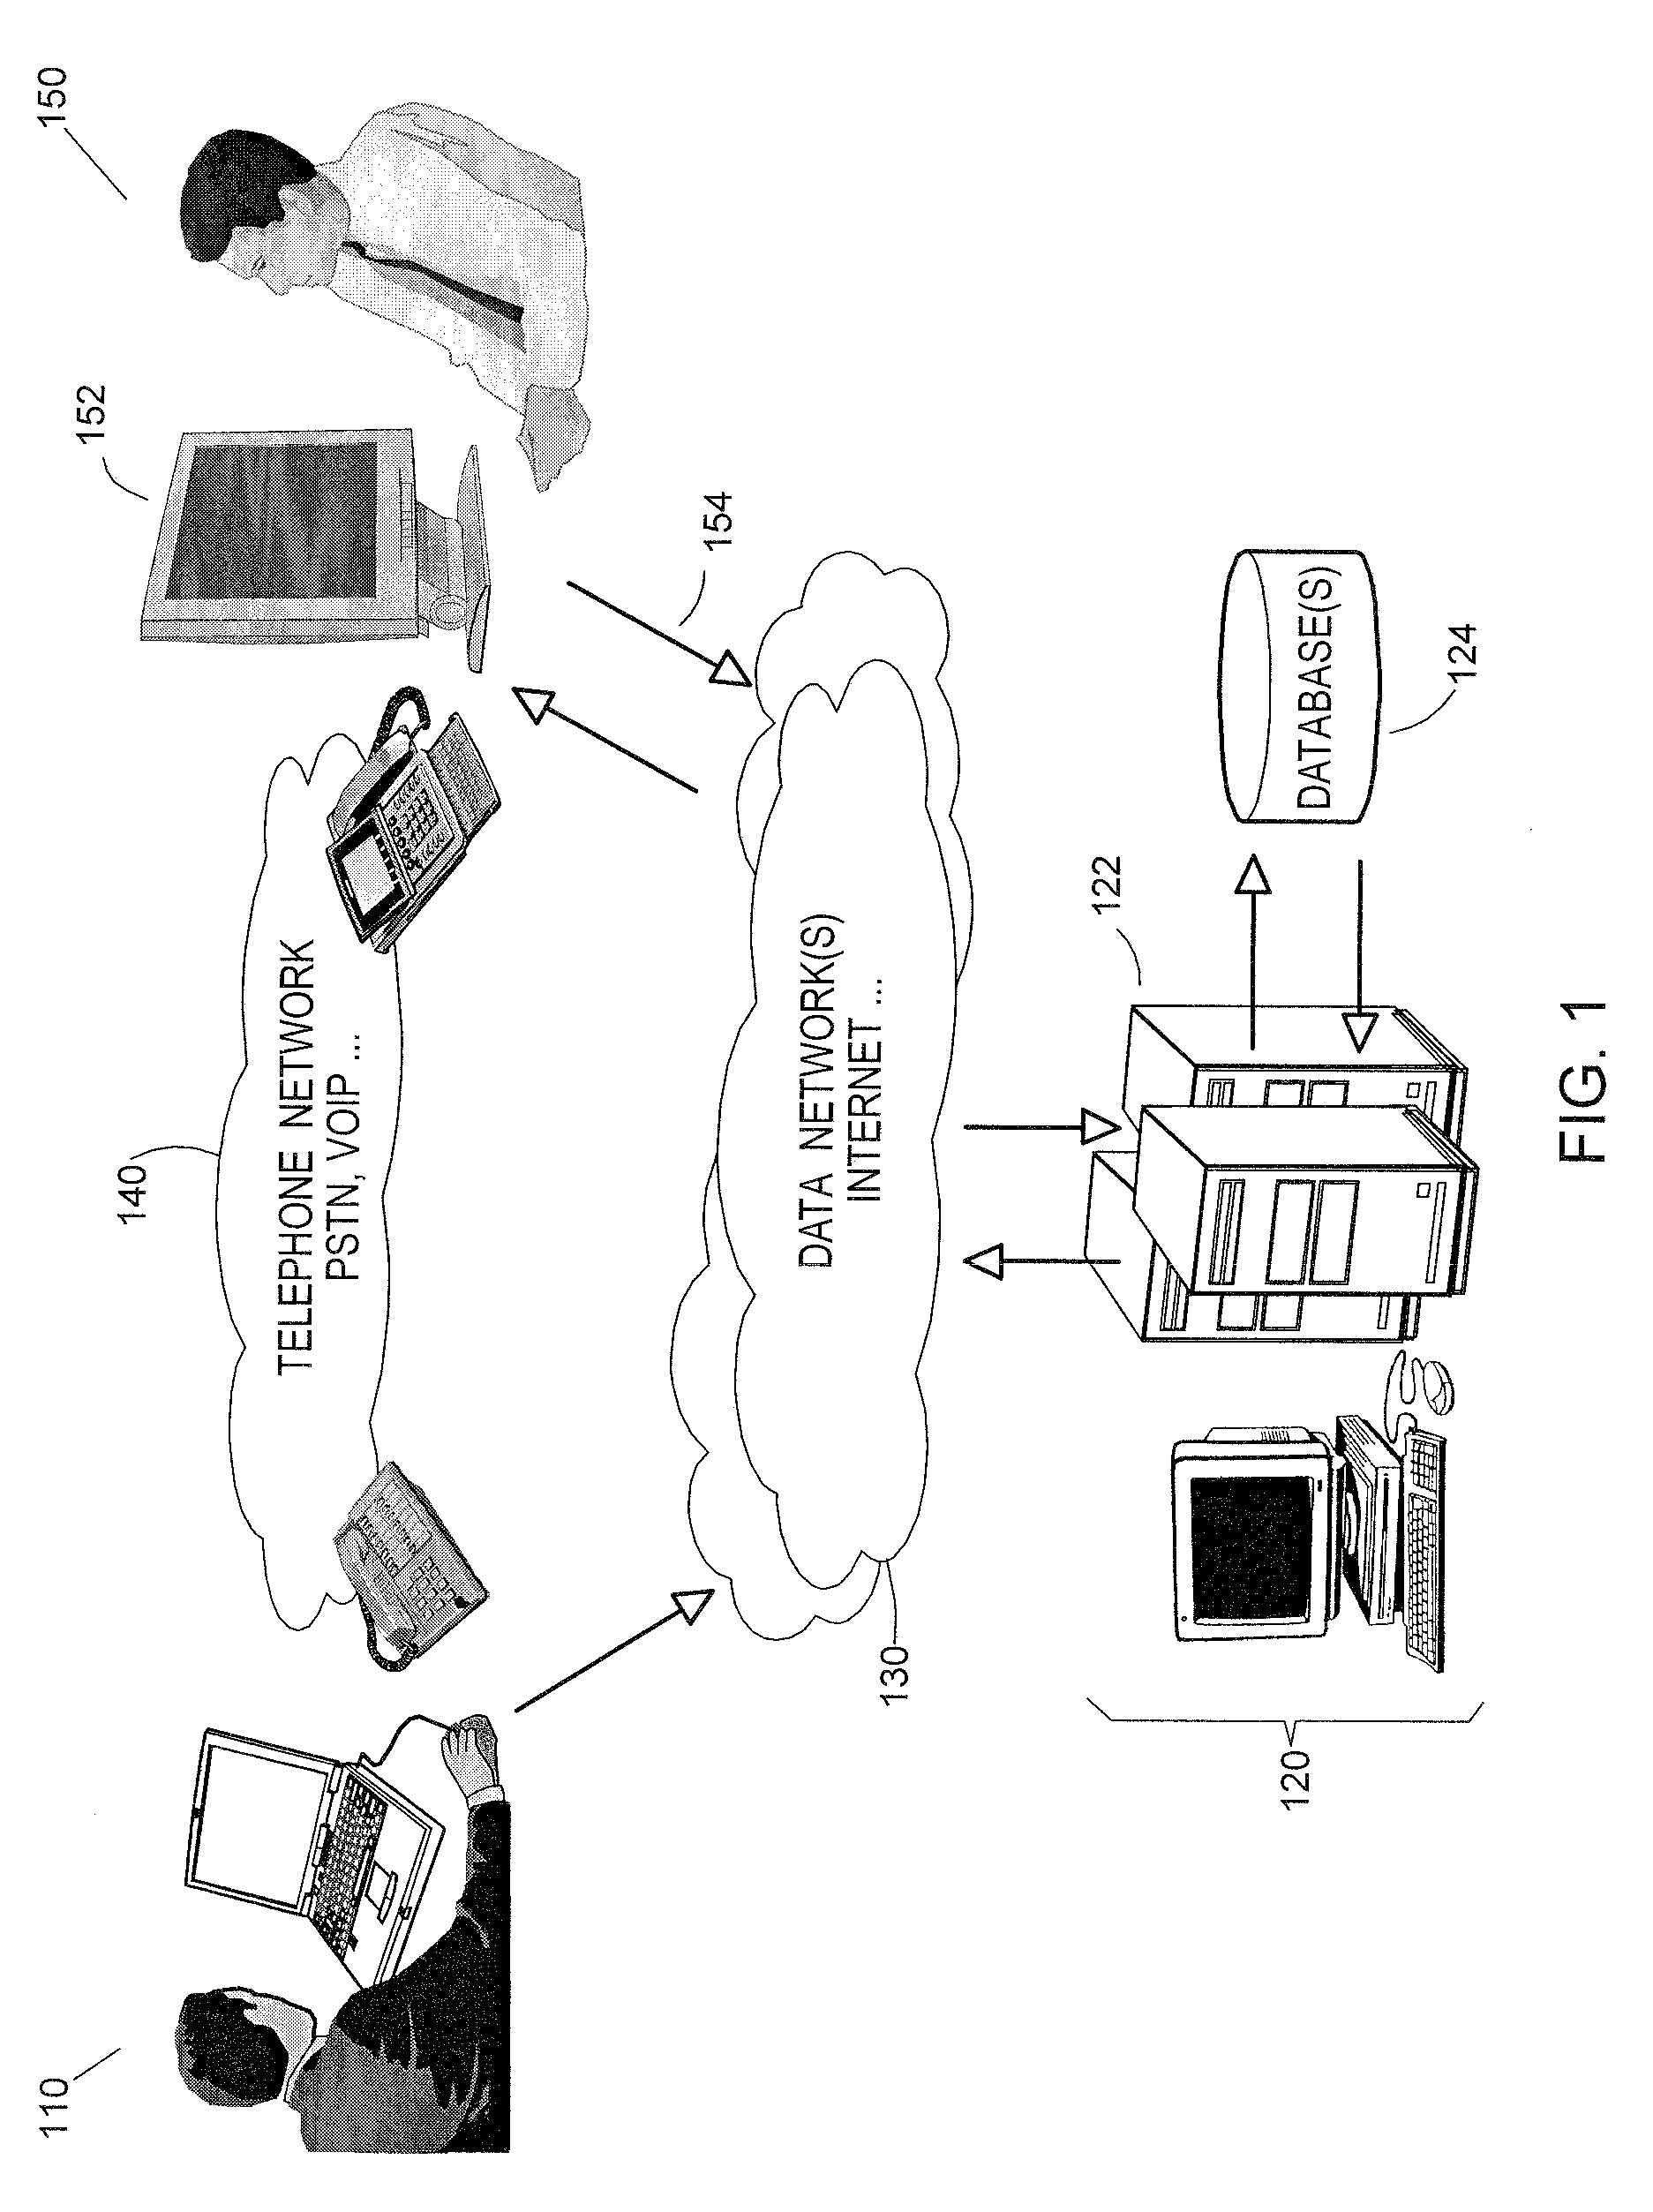 Method and system to hand over an online transaction to a help desk assistant